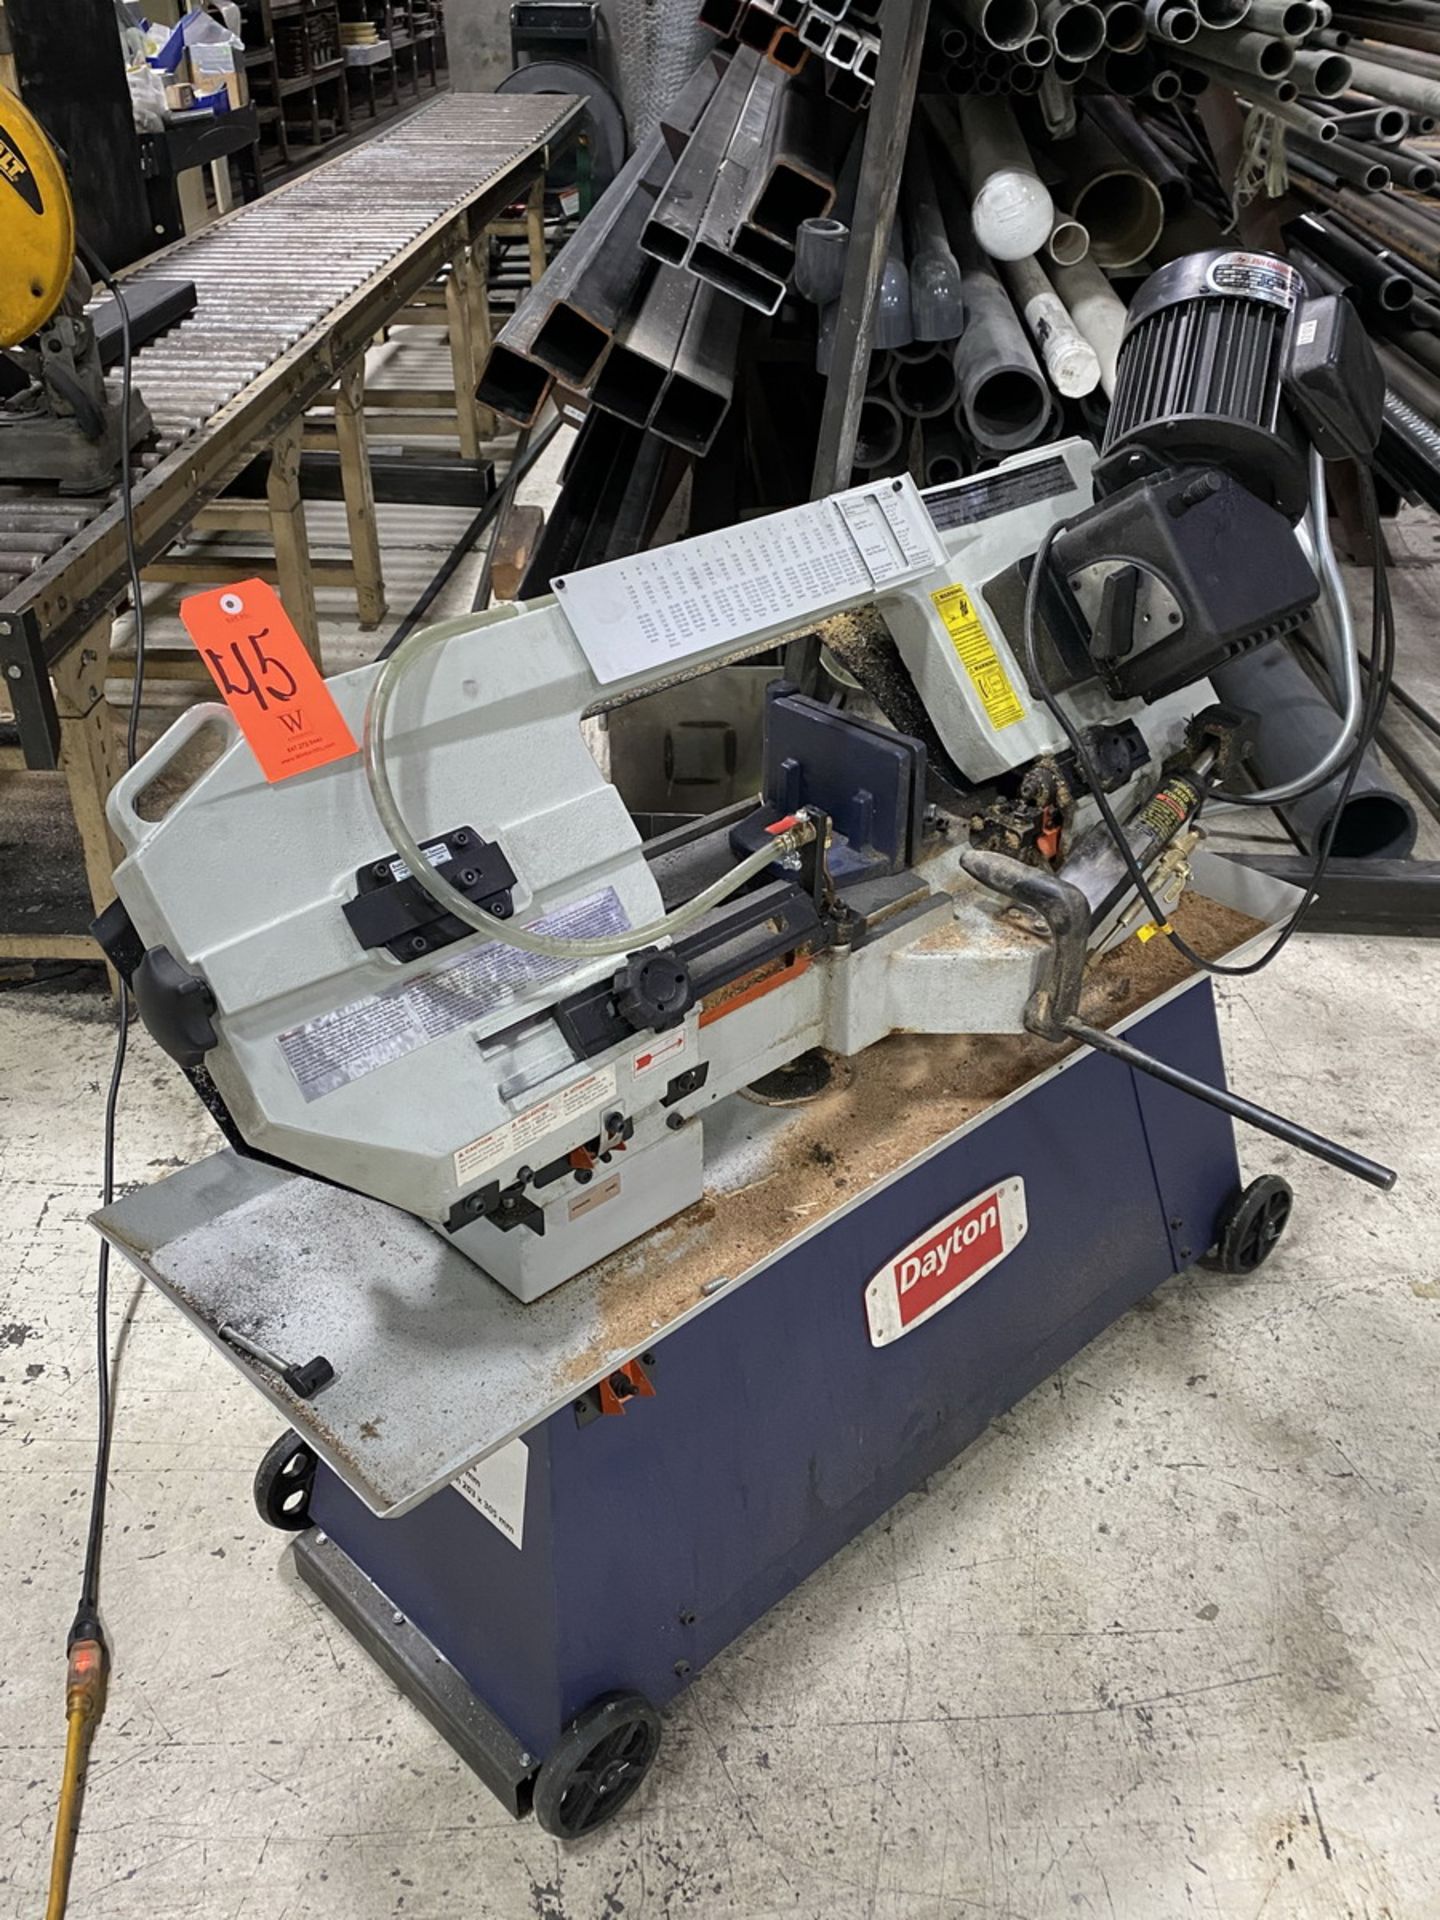 Dayton 8 in. x 12 in. Model 48WE31 Horizontal Band Saw, S/N: 101900097; 1-HP, 1,725 RPM, 120/240-V - Image 2 of 4